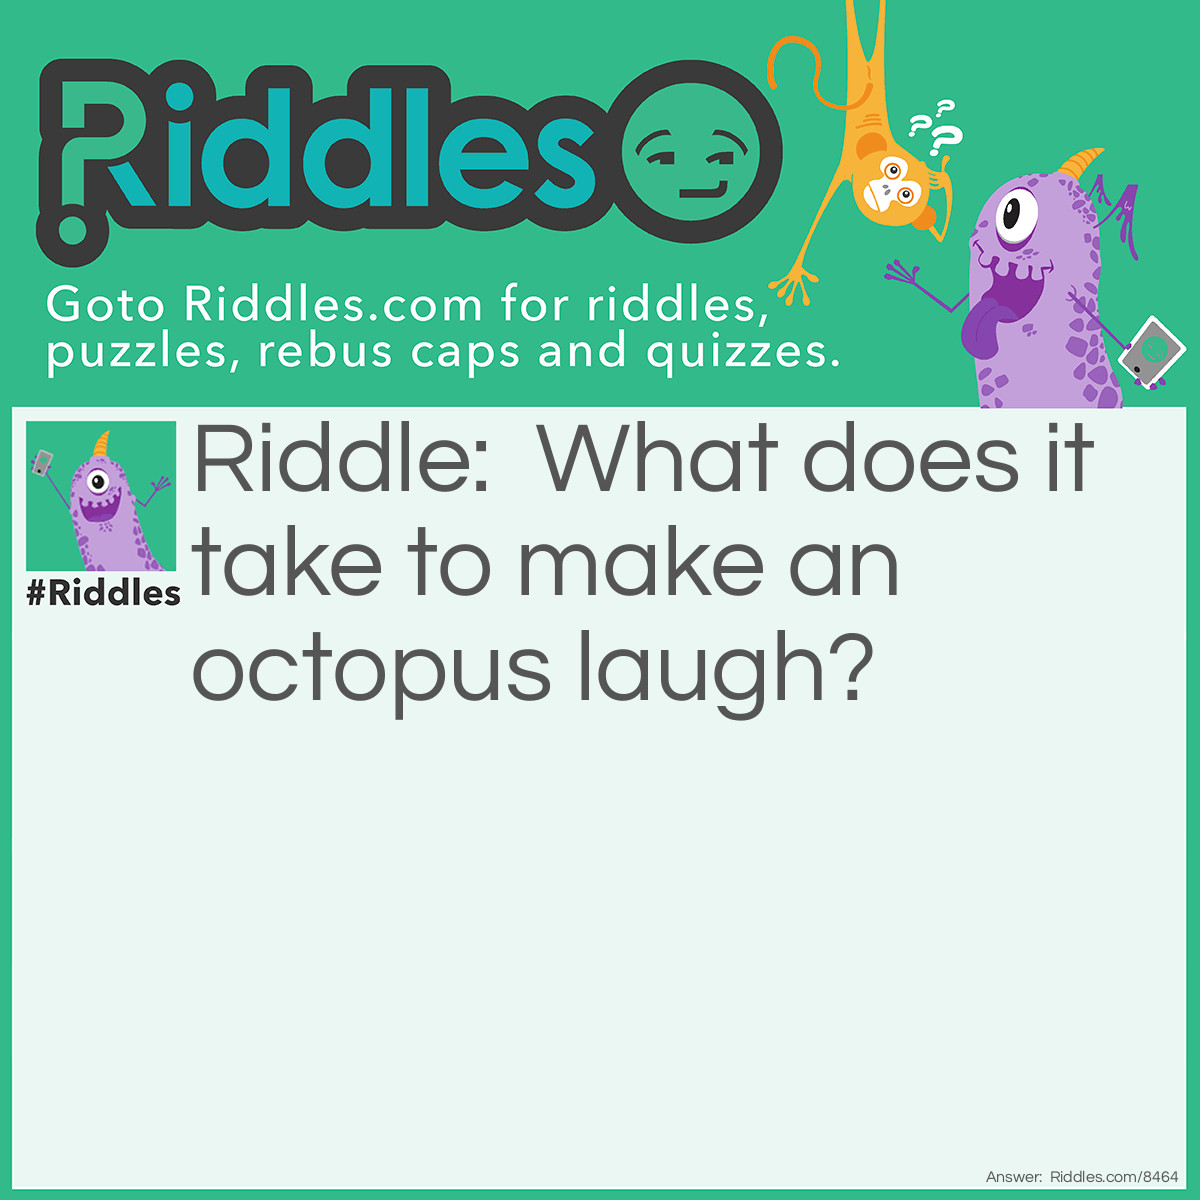 Riddle: What does it take to make an octopus laugh? Answer: Ten tickles.